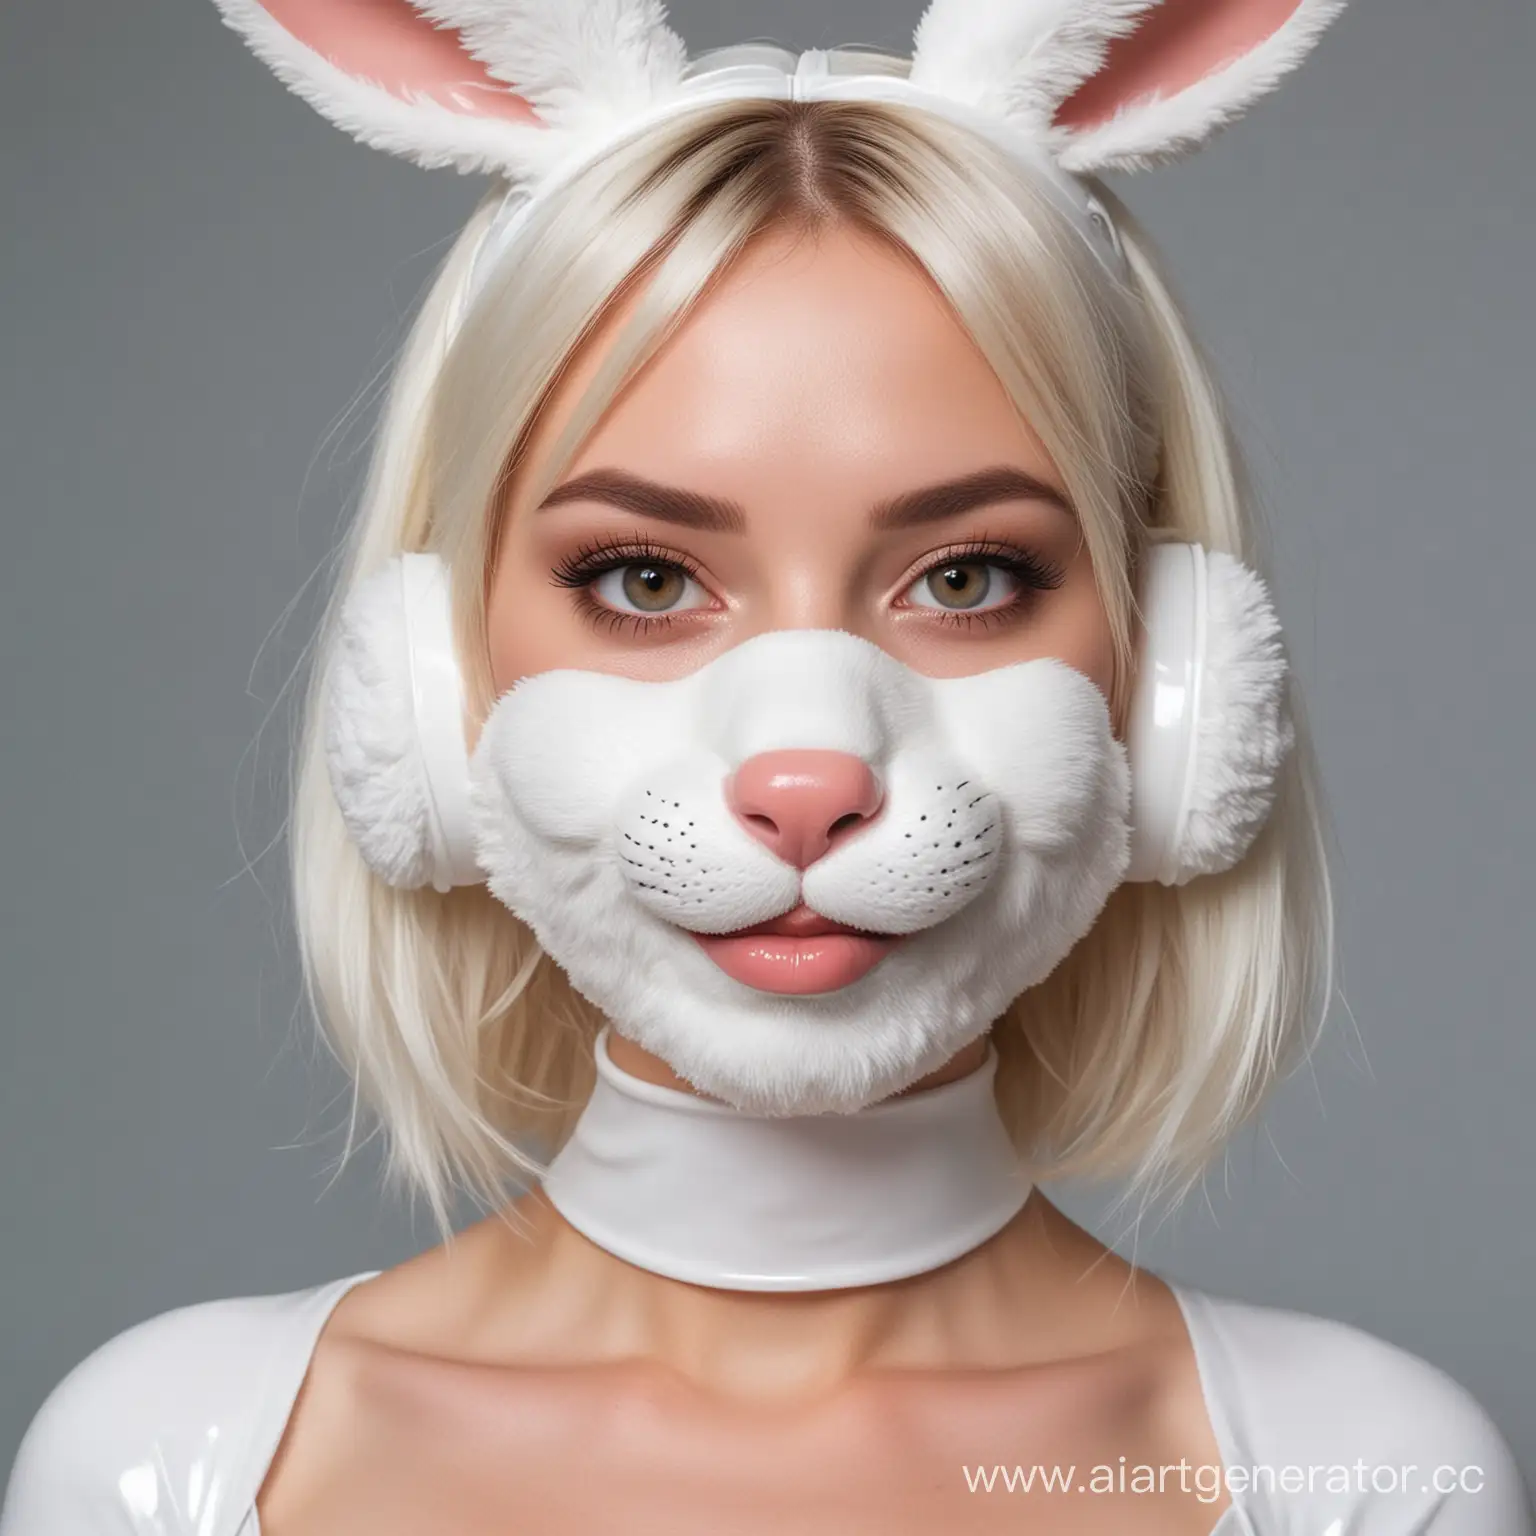 DisneyStyle-Latex-Bunny-Girl-with-White-Skin-and-Muzzle